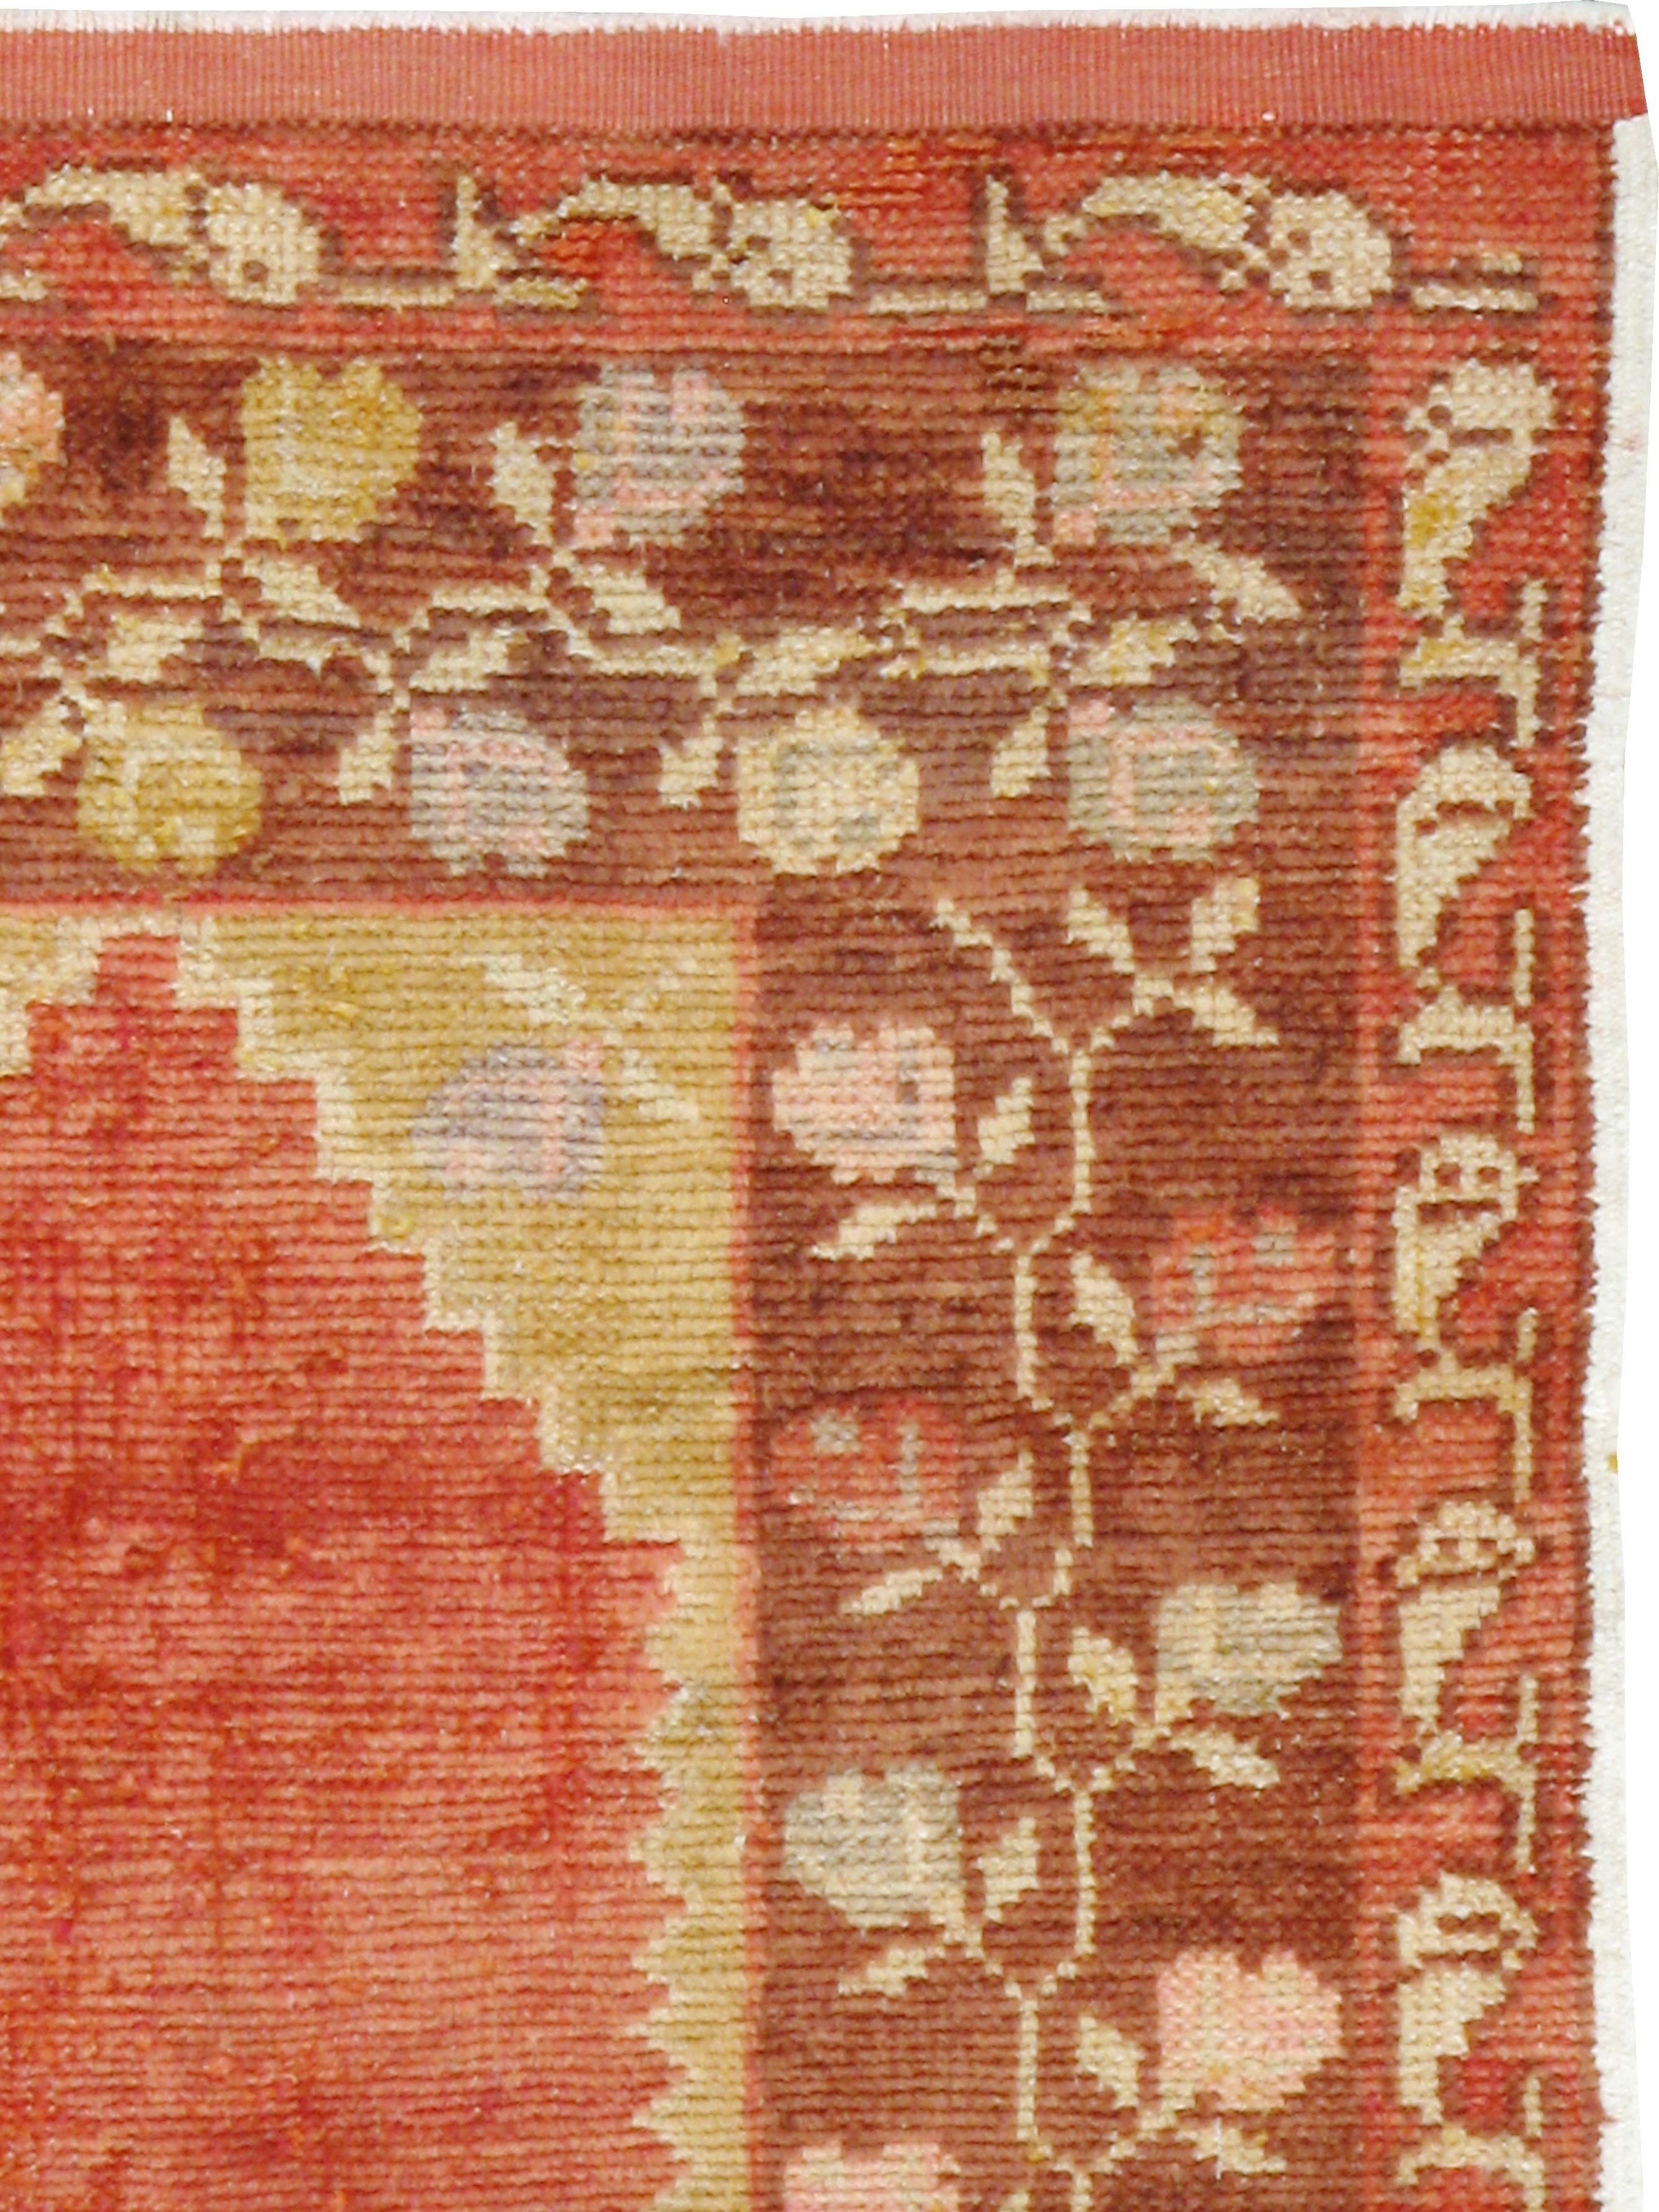 A vintage Turkish Anatolian rug from the mid-20th century.

Measures: 2' 4